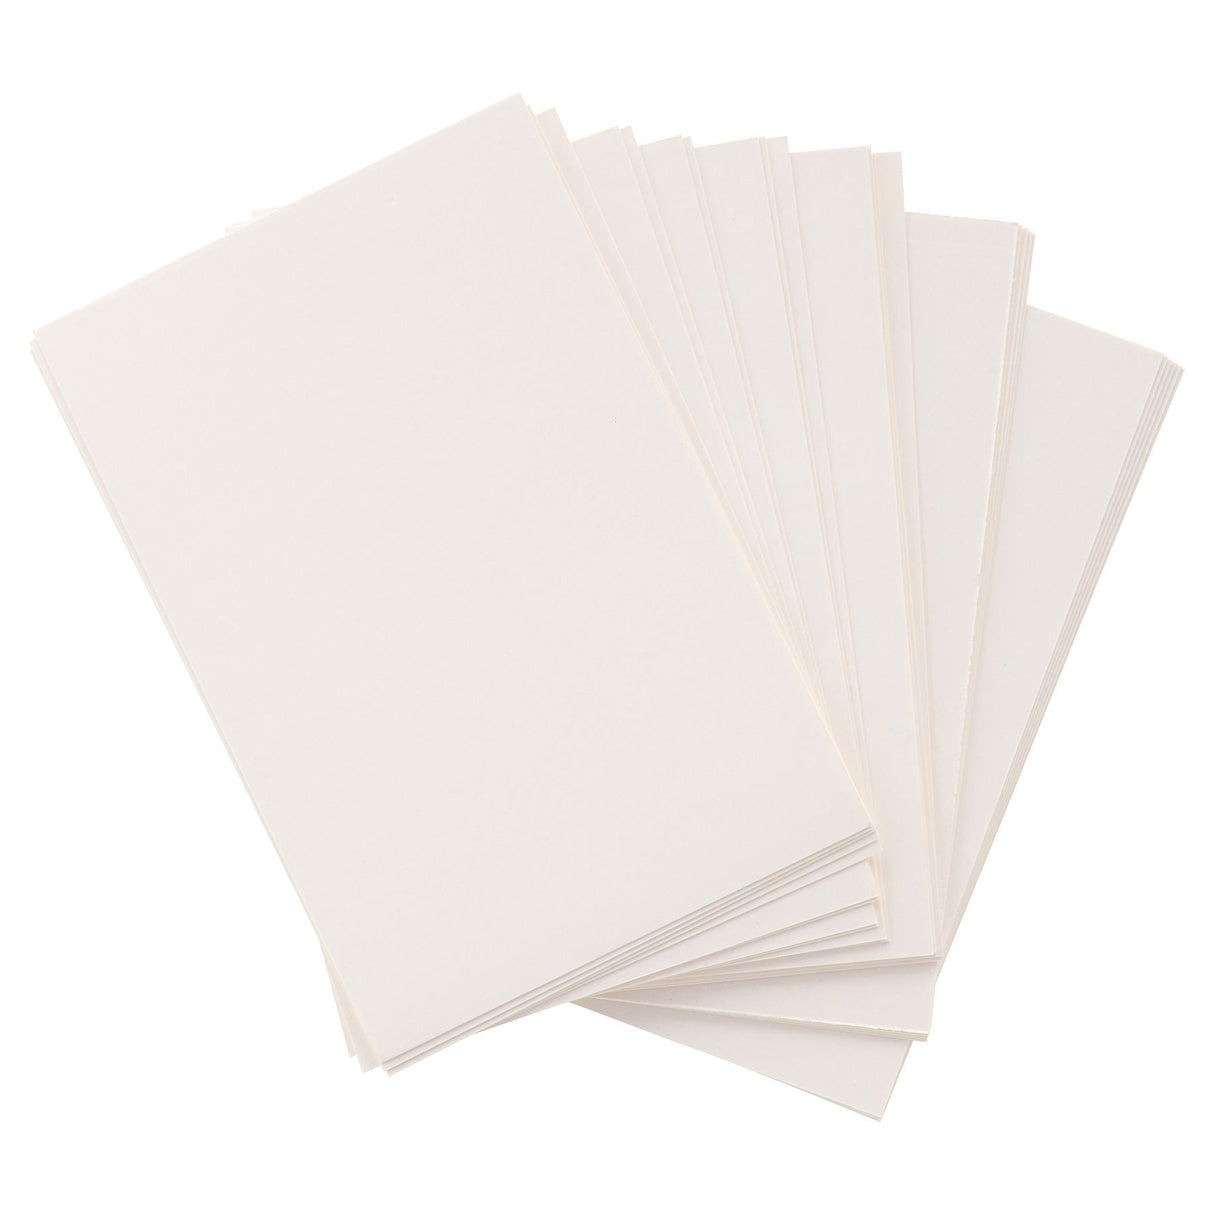 Premier Office 6x4 White Card - Pack of 30 | Stationery Shop UK